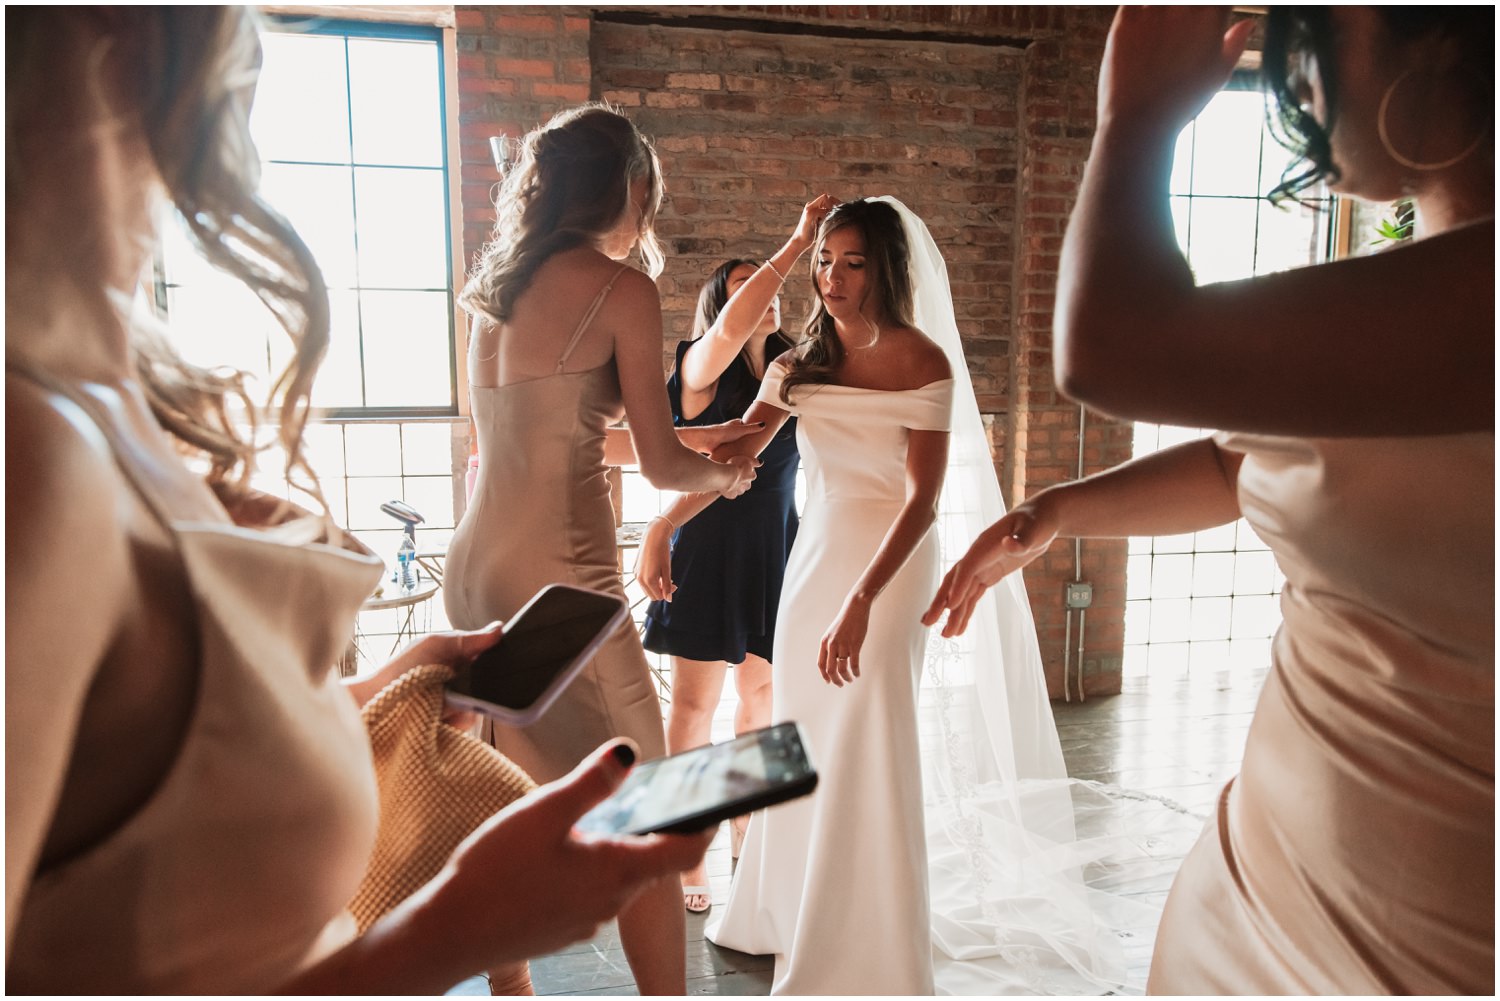 Fairlie Chicago Wedding getting ready bridesmaids helping bride to get ready